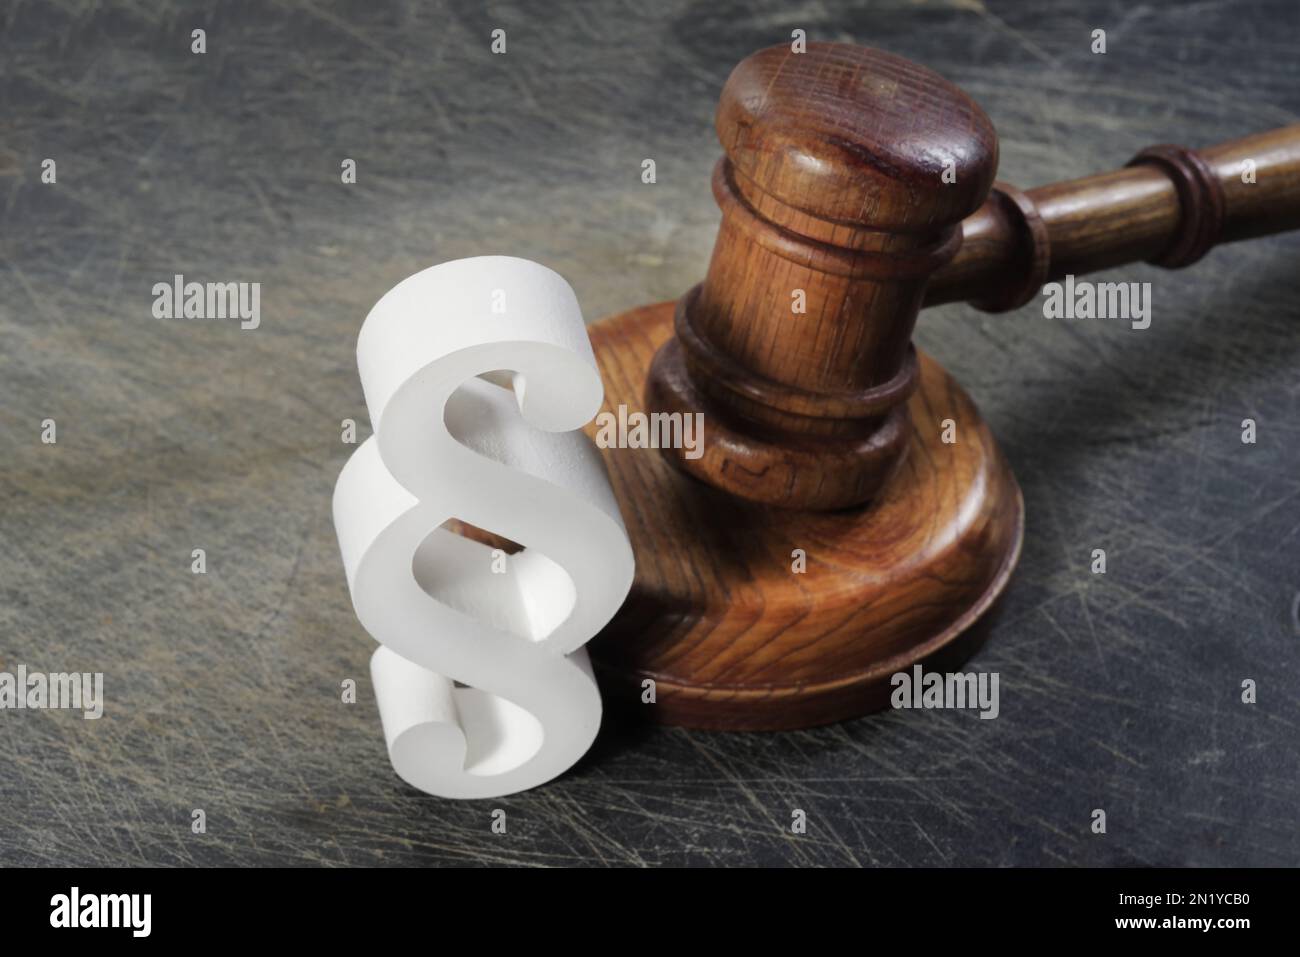 Legal concept of law and justice. Law and justice in everyday life Stock Photo